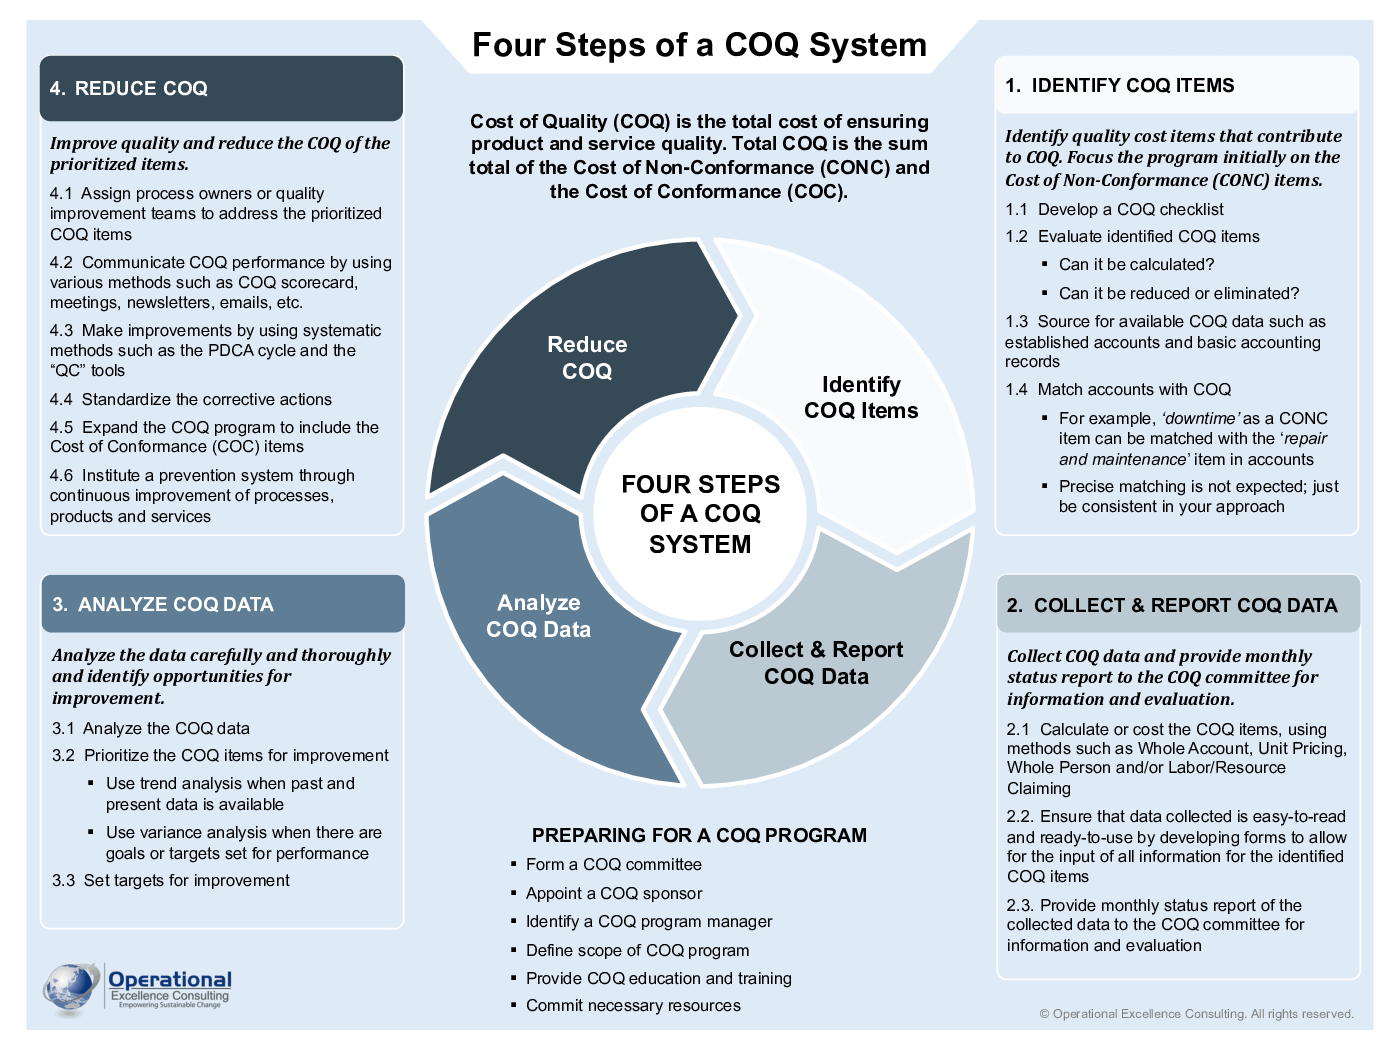 Four Steps of a COQ System Poster